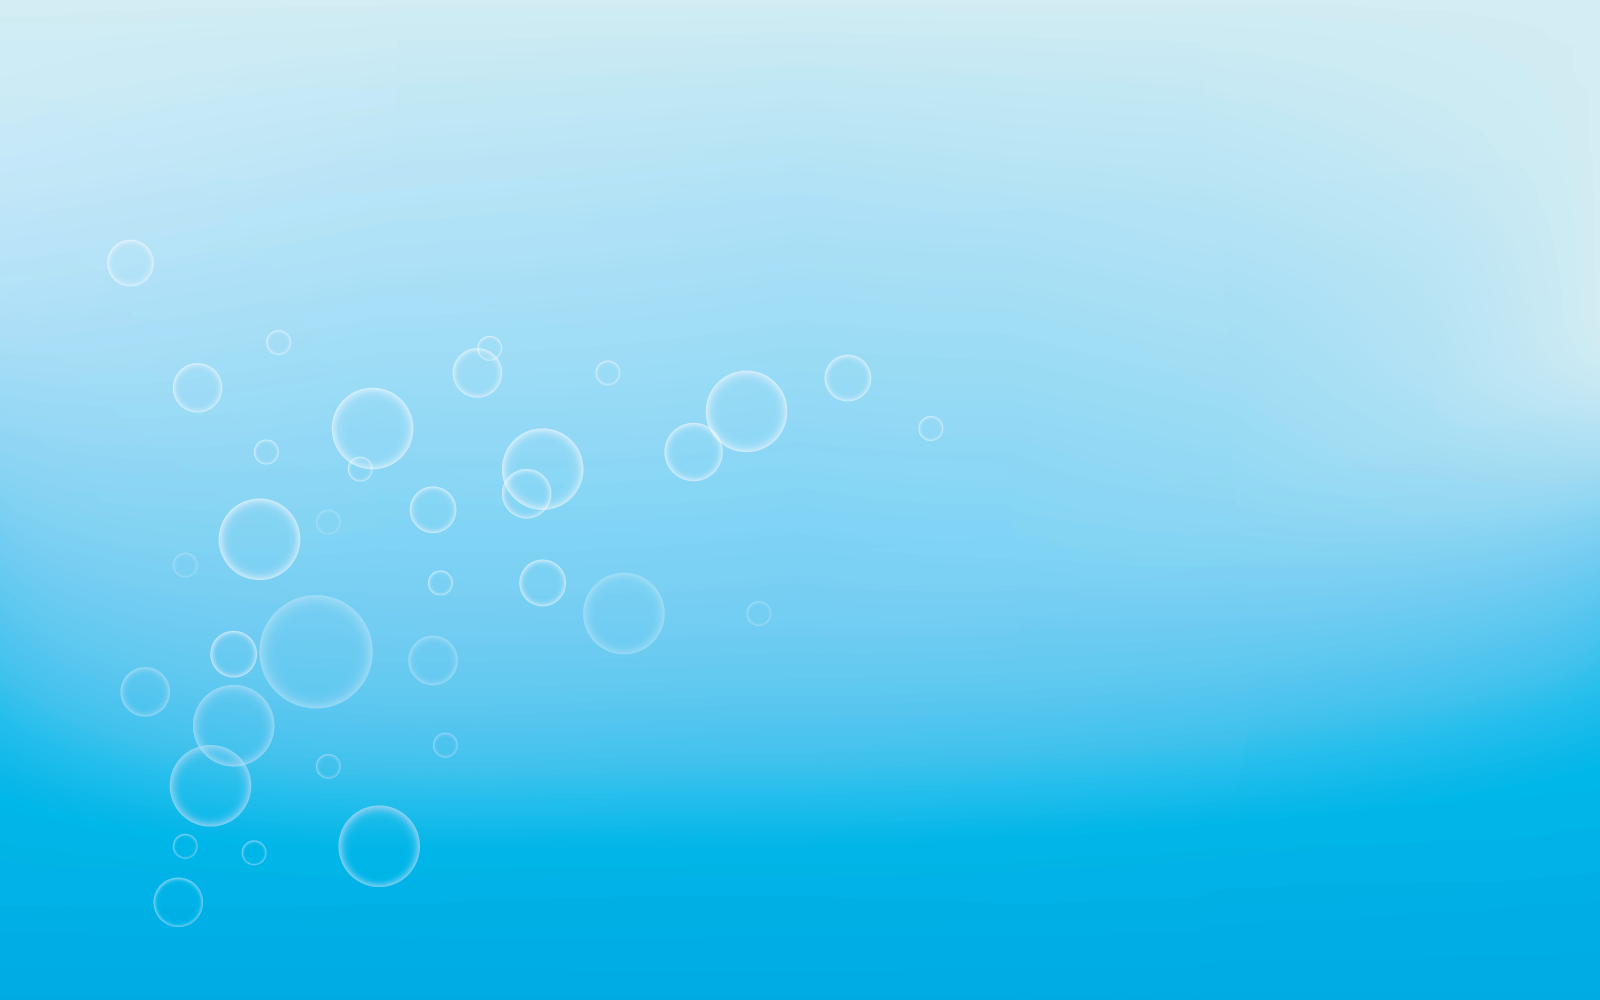 Natural realistic water bubble vector illustration icon